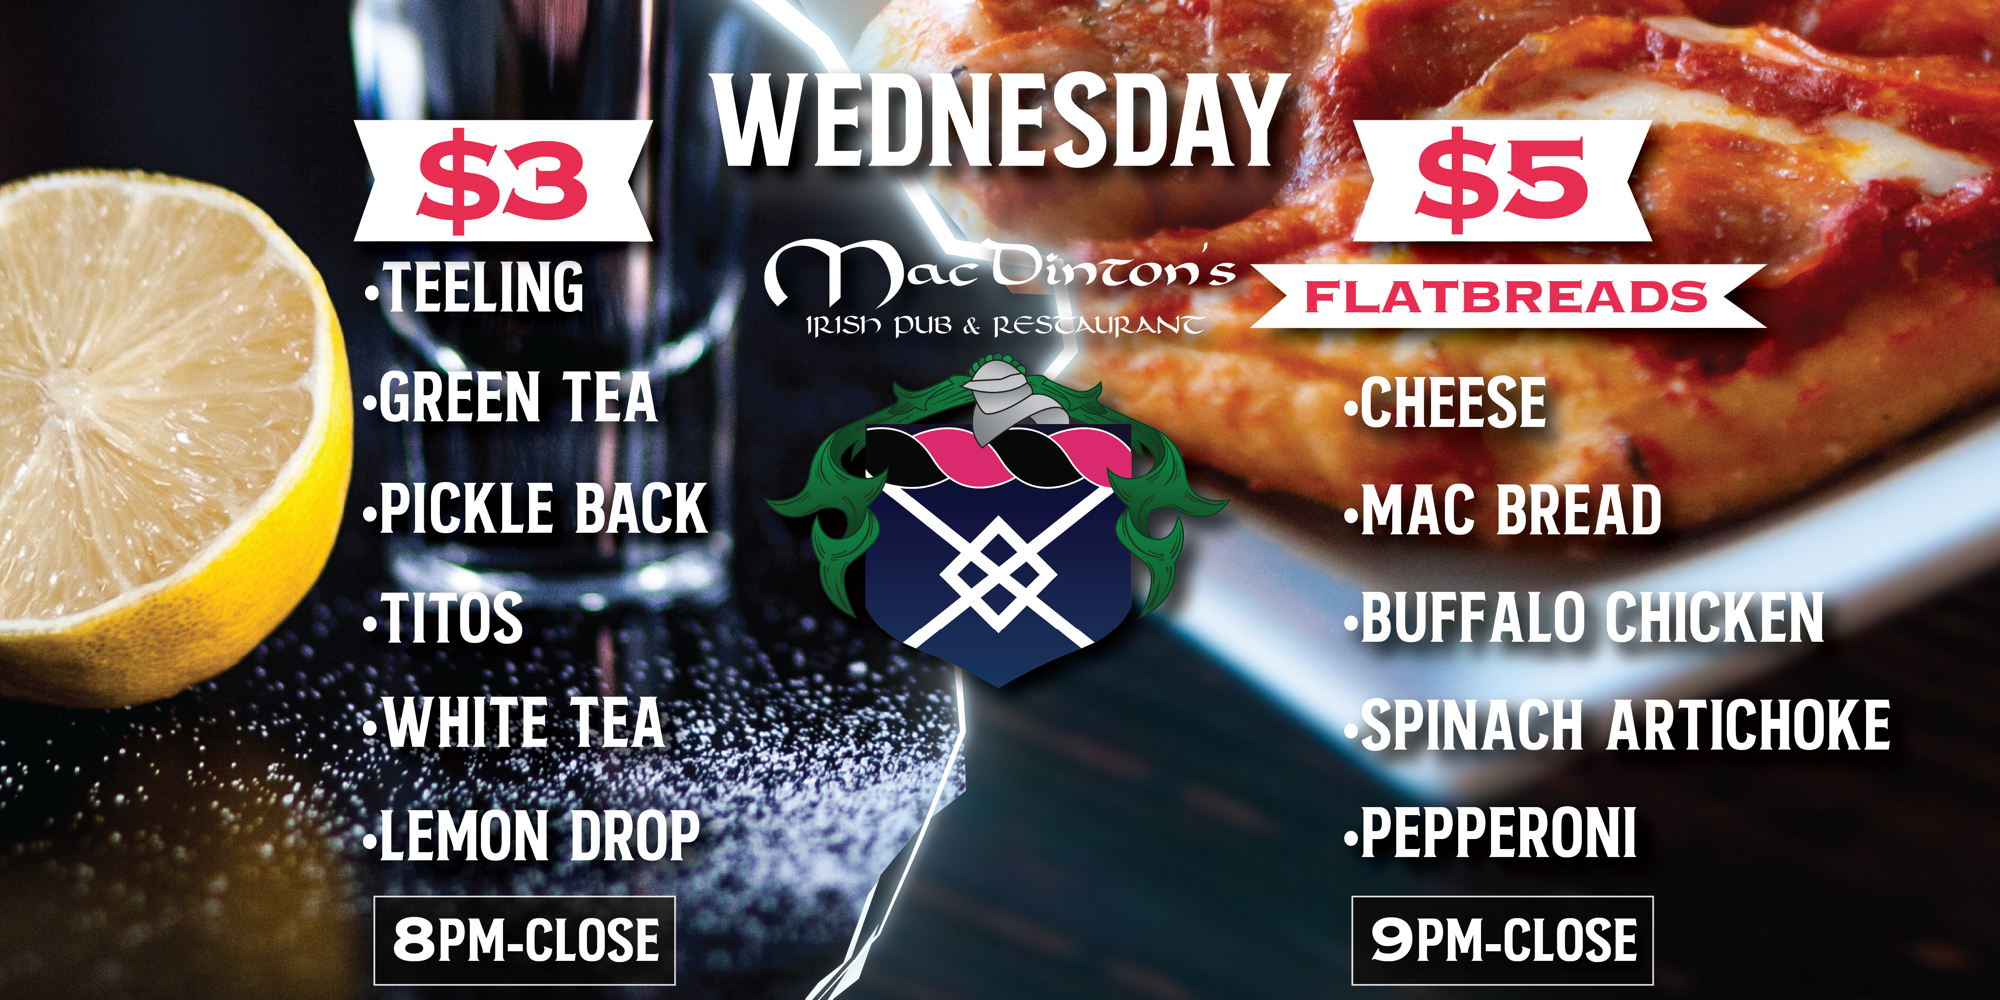 $3 Wednesday at Macs! promotional image